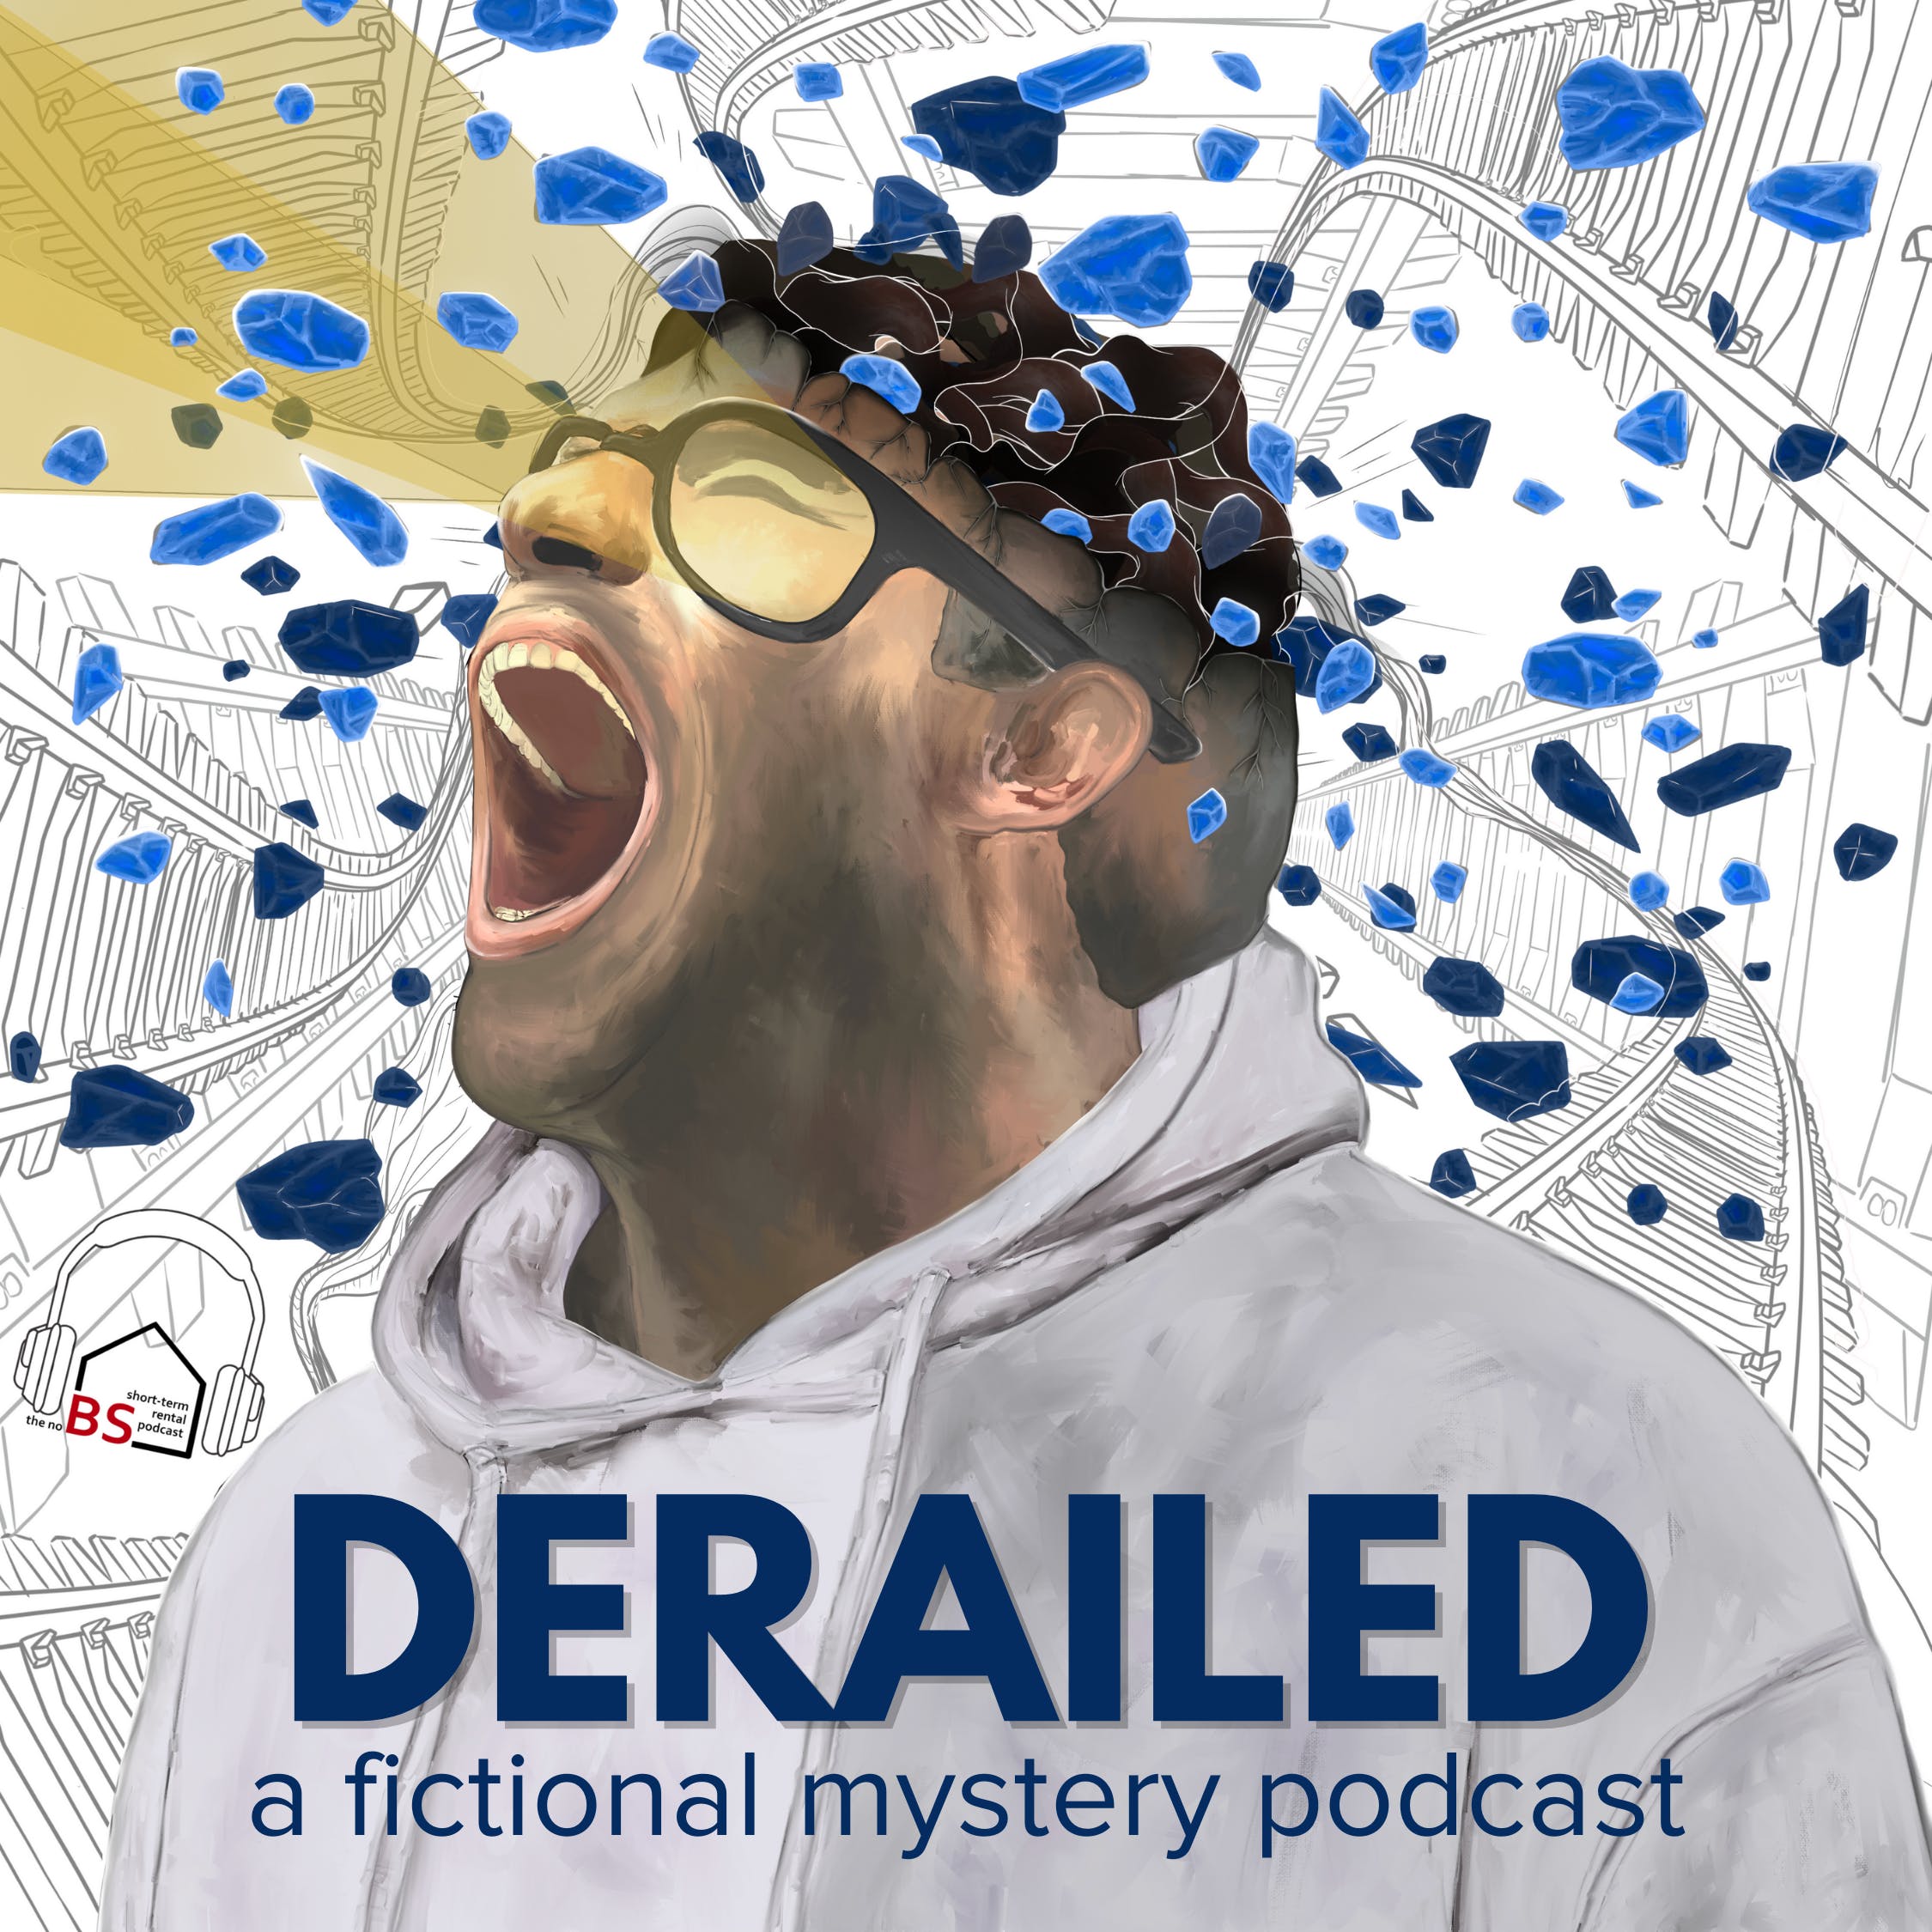 DERAILED: a fictional mystery podcast